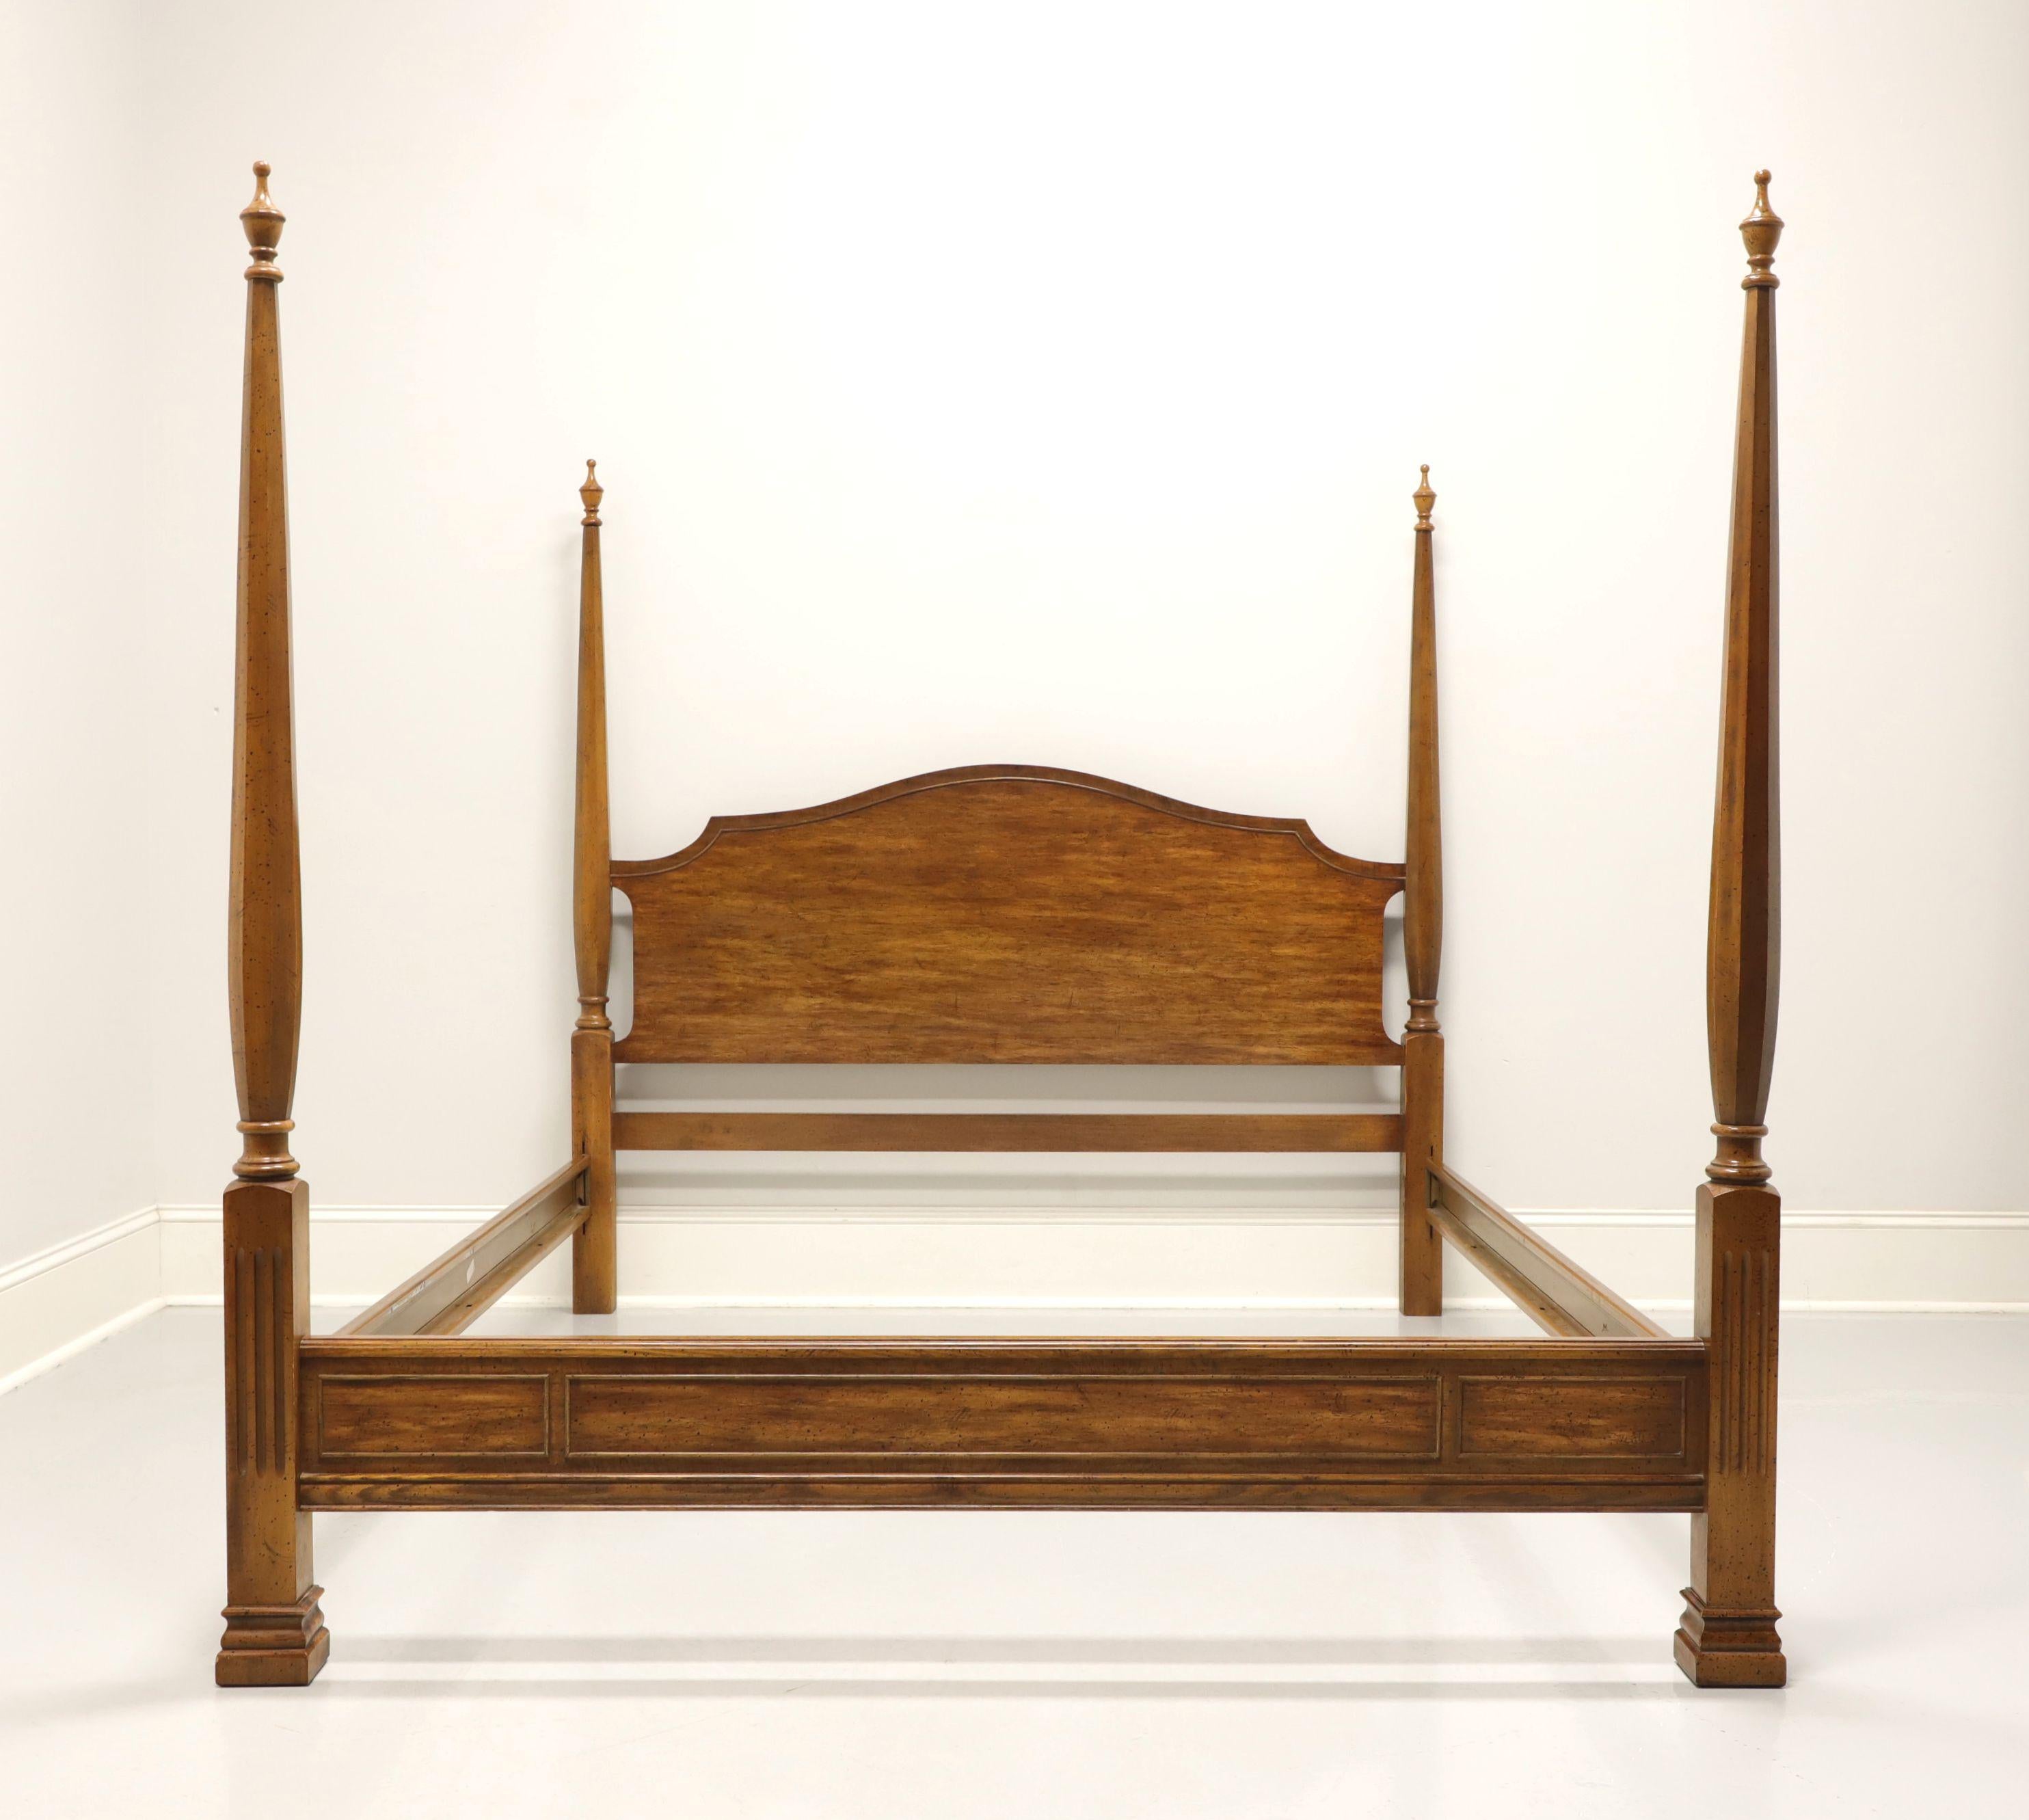 A Chippendale style queen size poster bed by Dixie Furniture, from their Sheffield Manor Collection. Pecan headboard and footboard with clip held wood grain metal side rails. Features headboard with two turned posts with finials and footboard with